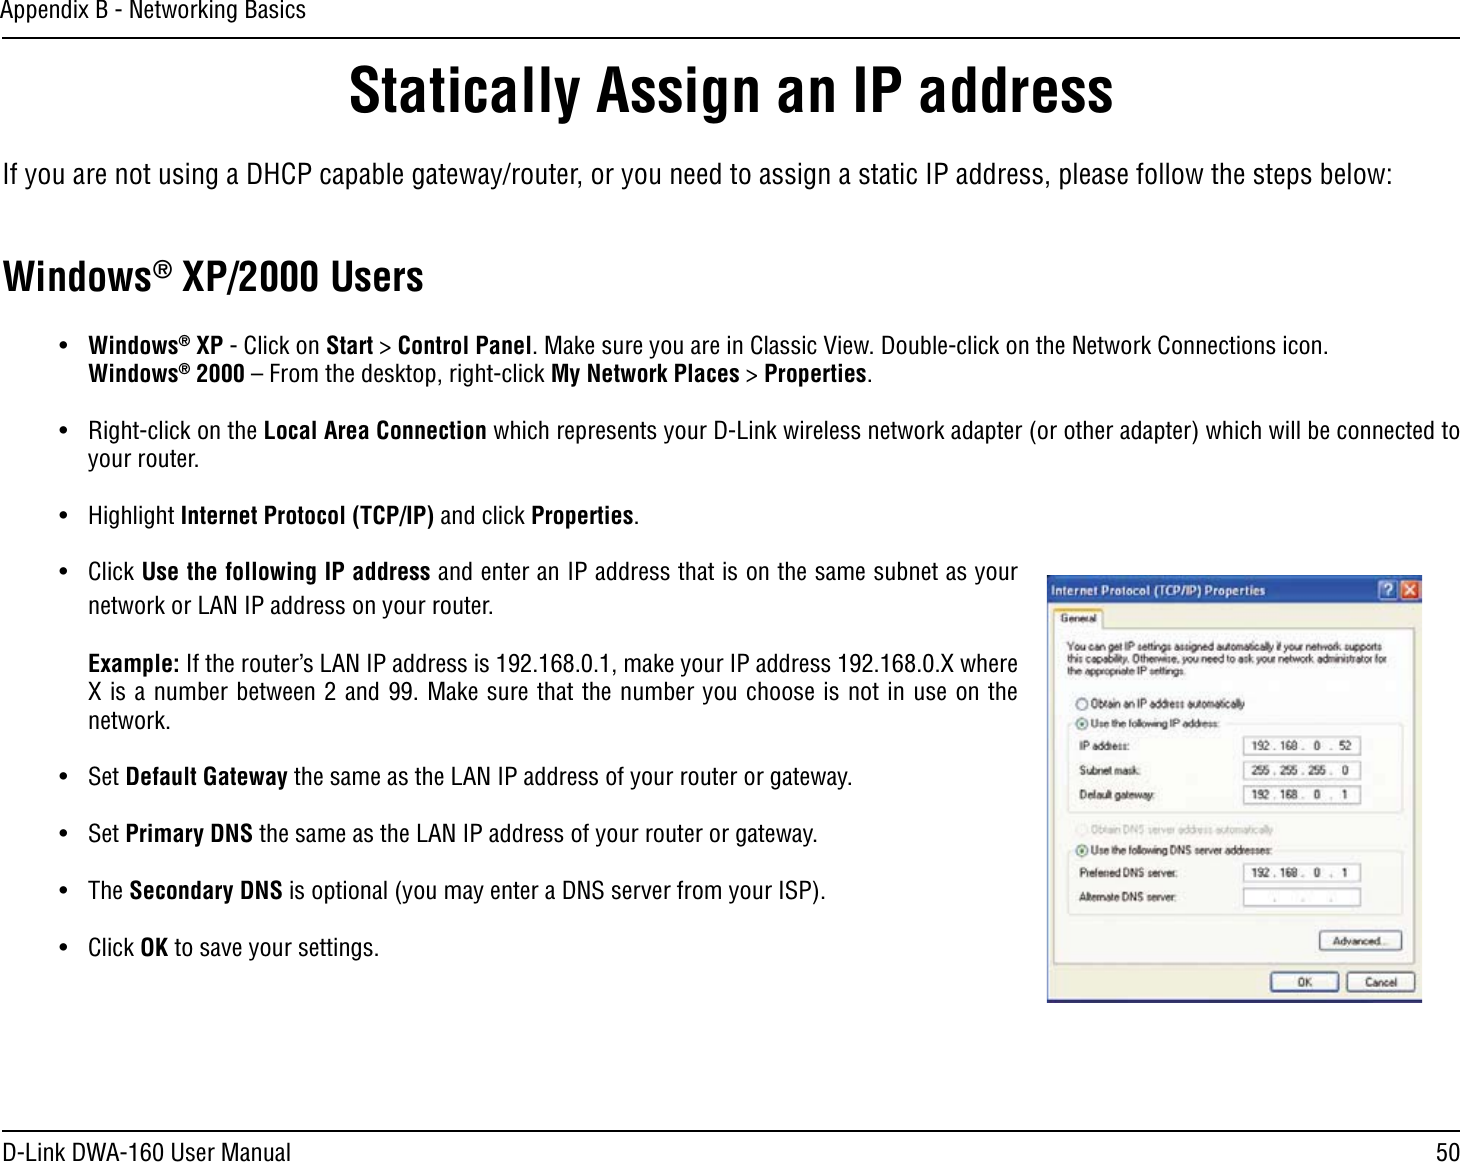 50D-Link DWA-160 User ManualAppendix B - Networking BasicsStatically Assign an IP addressIf you are not using a DHCP capable gateway/router, or you need to assign a static IP address, please follow the steps below:Windows® XP/2000 Userss Windows® XP - Click on Start &gt; Control Panel. Make sure you are in Classic View. Double-click on the Network Connections icon. Windows® 2000 – From the desktop, right-click My Network Places &gt; Properties.s 2IGHTCLICKONTHELocal Area Connection which represents your D-Link wireless network adapter (or other adapter) which will be connected to your router.s (IGHLIGHTInternet Protocol (TCP/IP) and click Properties.s #LICKUse the following IP address and enter an IP address that is on the same subnet as your network or LAN IP address on your router. Example:)FTHEROUTERS,!.)0ADDRESSISMAKEYOUR)0ADDRESS8WHEREX is a number between 2 and 99. Make sure that the number you choose is not in use on the network. s 3ETDefault Gateway the same as the LAN IP address of your router or gateway.s 3ETPrimary DNS the same as the LAN IP address of your router or gateway. s 4HESecondary DNS is optional (you may enter a DNS server from your ISP).s #LICKOK to save your settings.